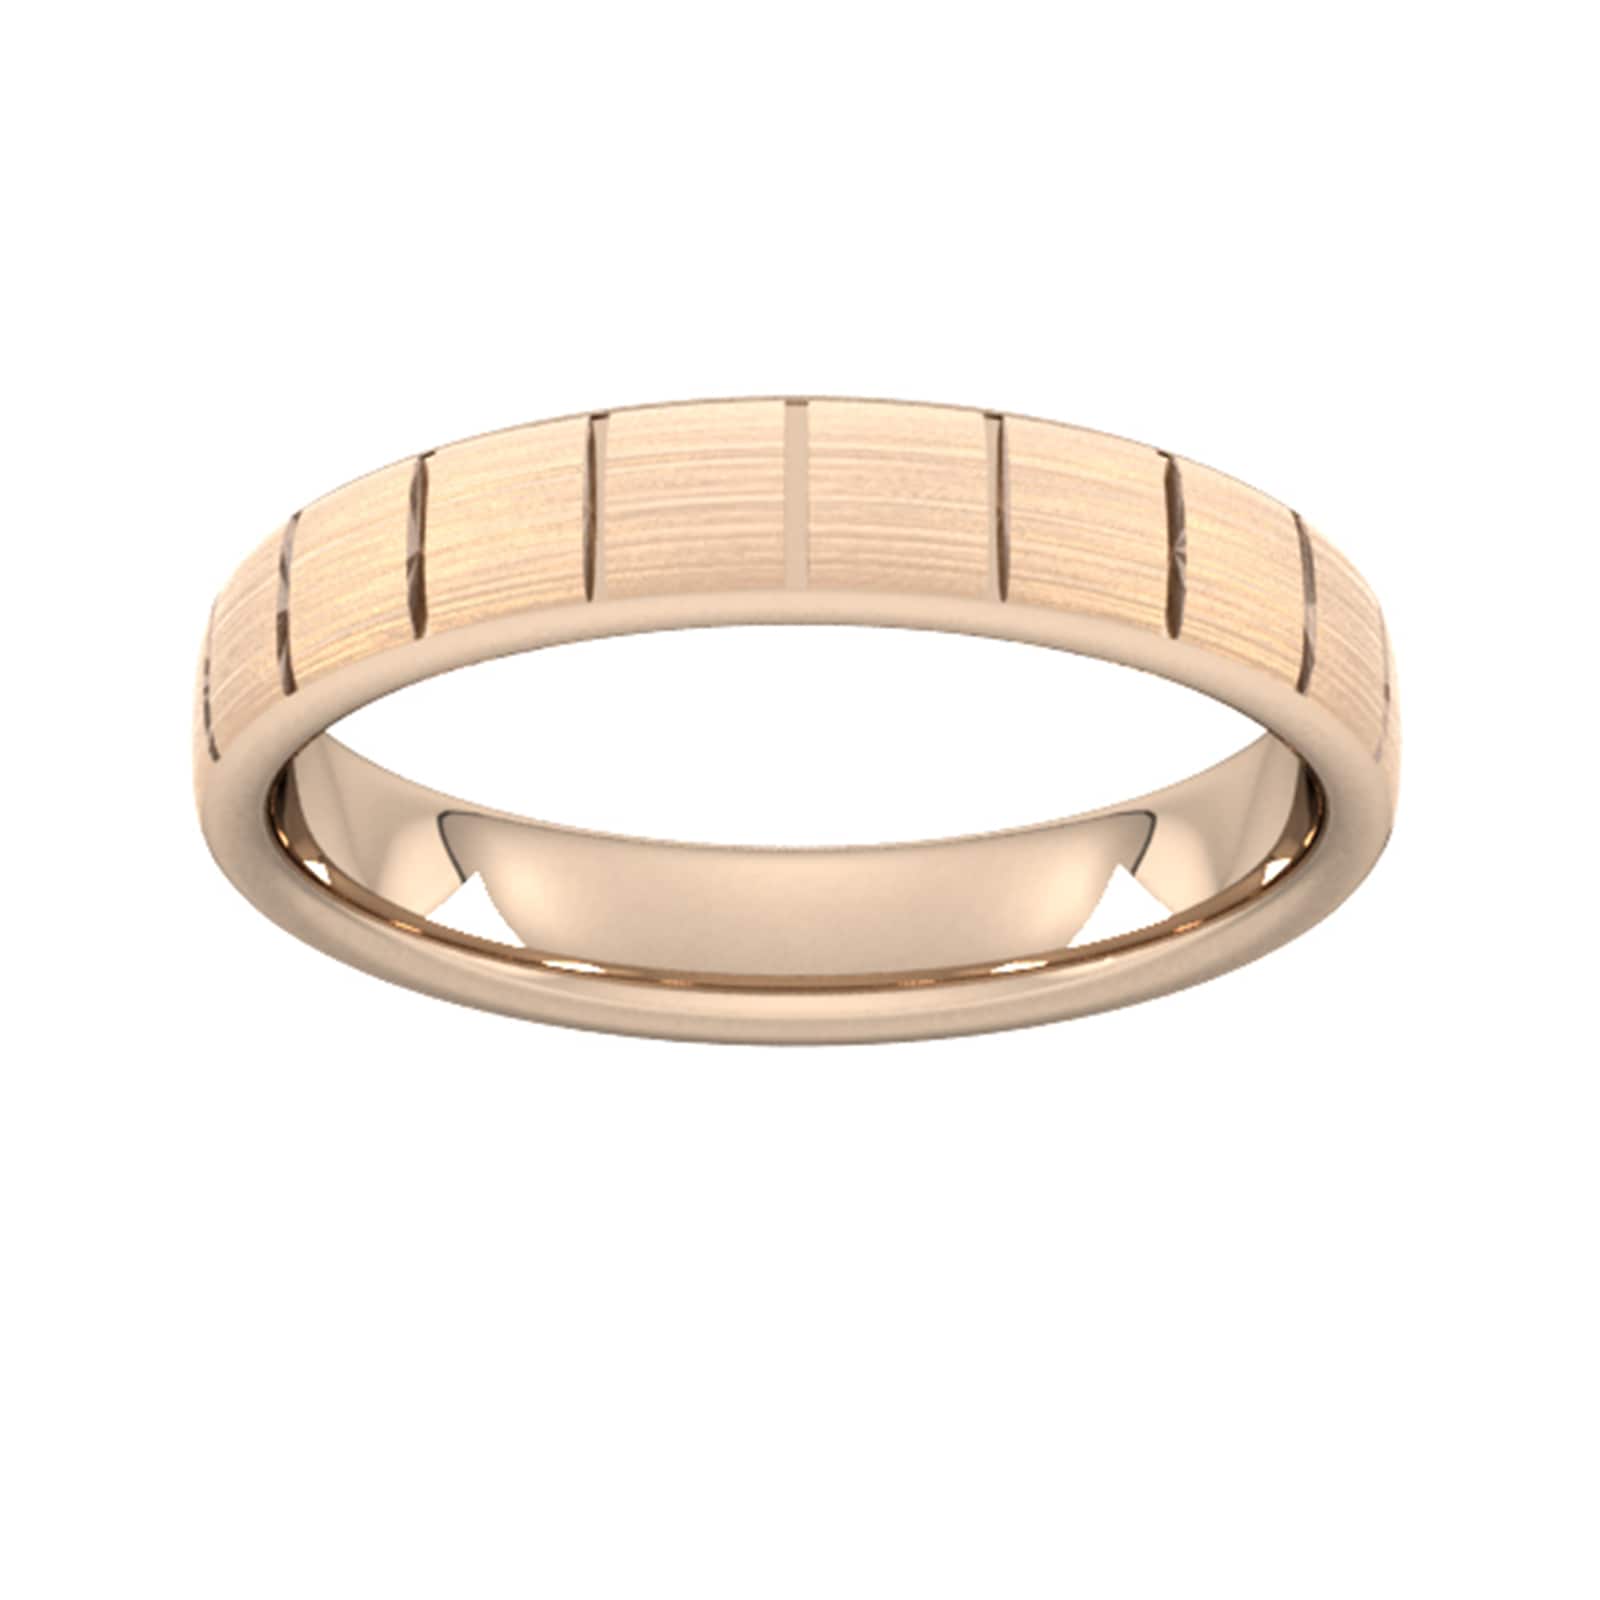 4mm Slight Court Heavy Vertical Lines Wedding Ring In 9 Carat Rose Gold - Ring Size M